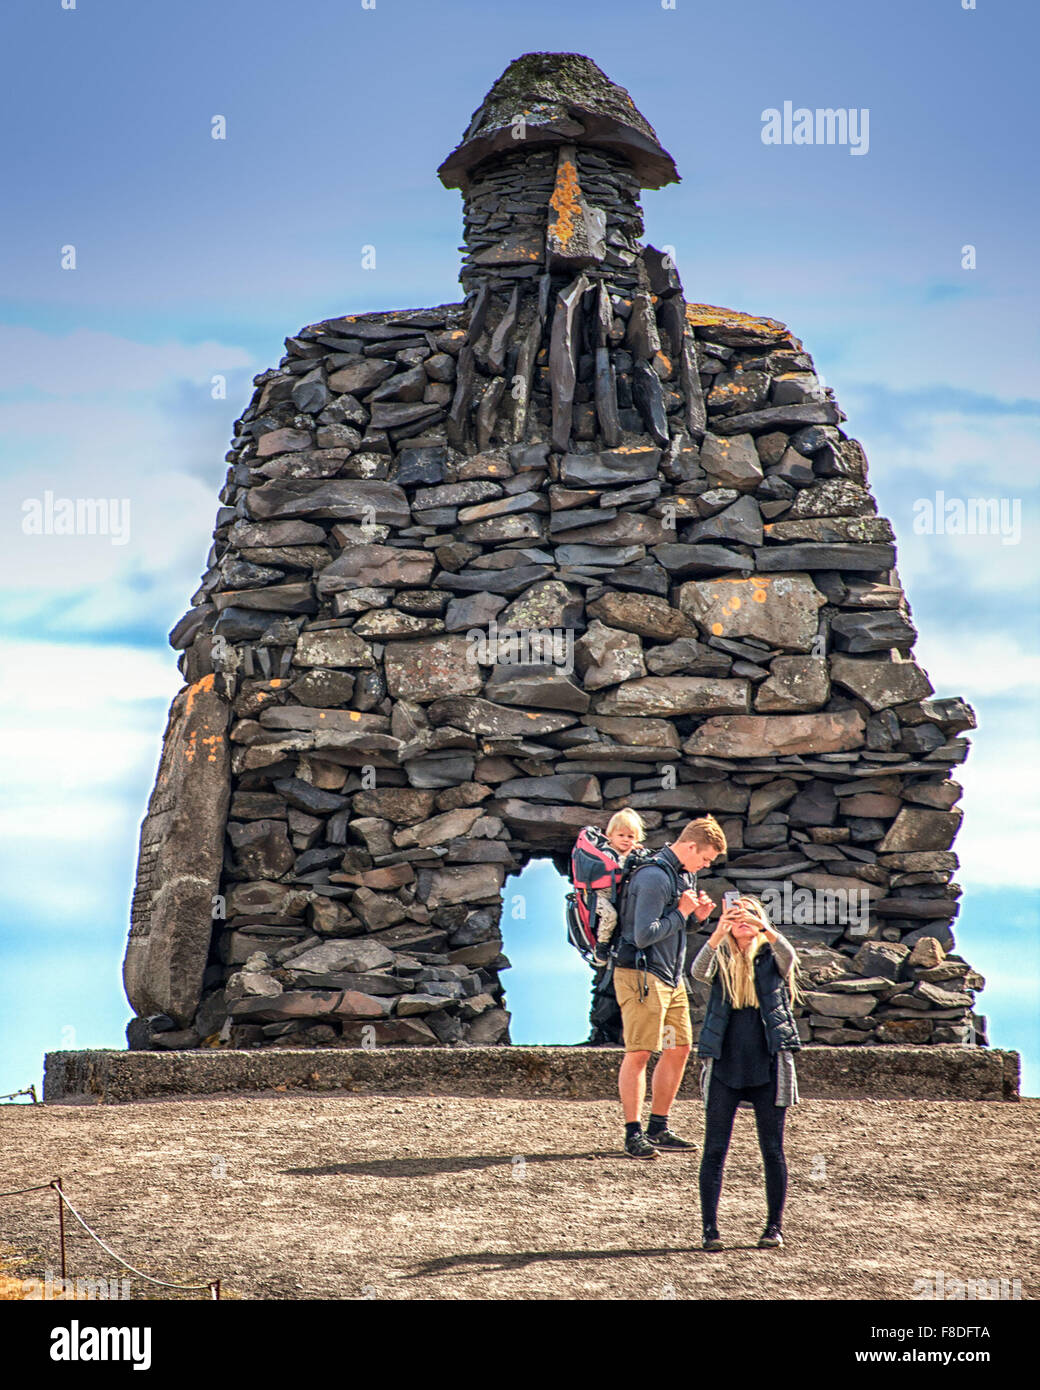 Arnarstapi, Snaefellsnes Peninsula, Iceland. 30th July, 2015. A tourist with a child in a backpack carrier, and his companion looking at her smartphone, visit the huge stone structure of Bardur SnaefellsÃ¡s at Arnarstapi on the Snaefellsnes peninsula in West Iceland. By sculptor Ragnar Kjartansson, it relates to a late Icelander saga with legendary elements dating to the early 14th century. It is a favorite tourist destination. © Arnold Drapkin/ZUMA Wire/Alamy Live News Stock Photo